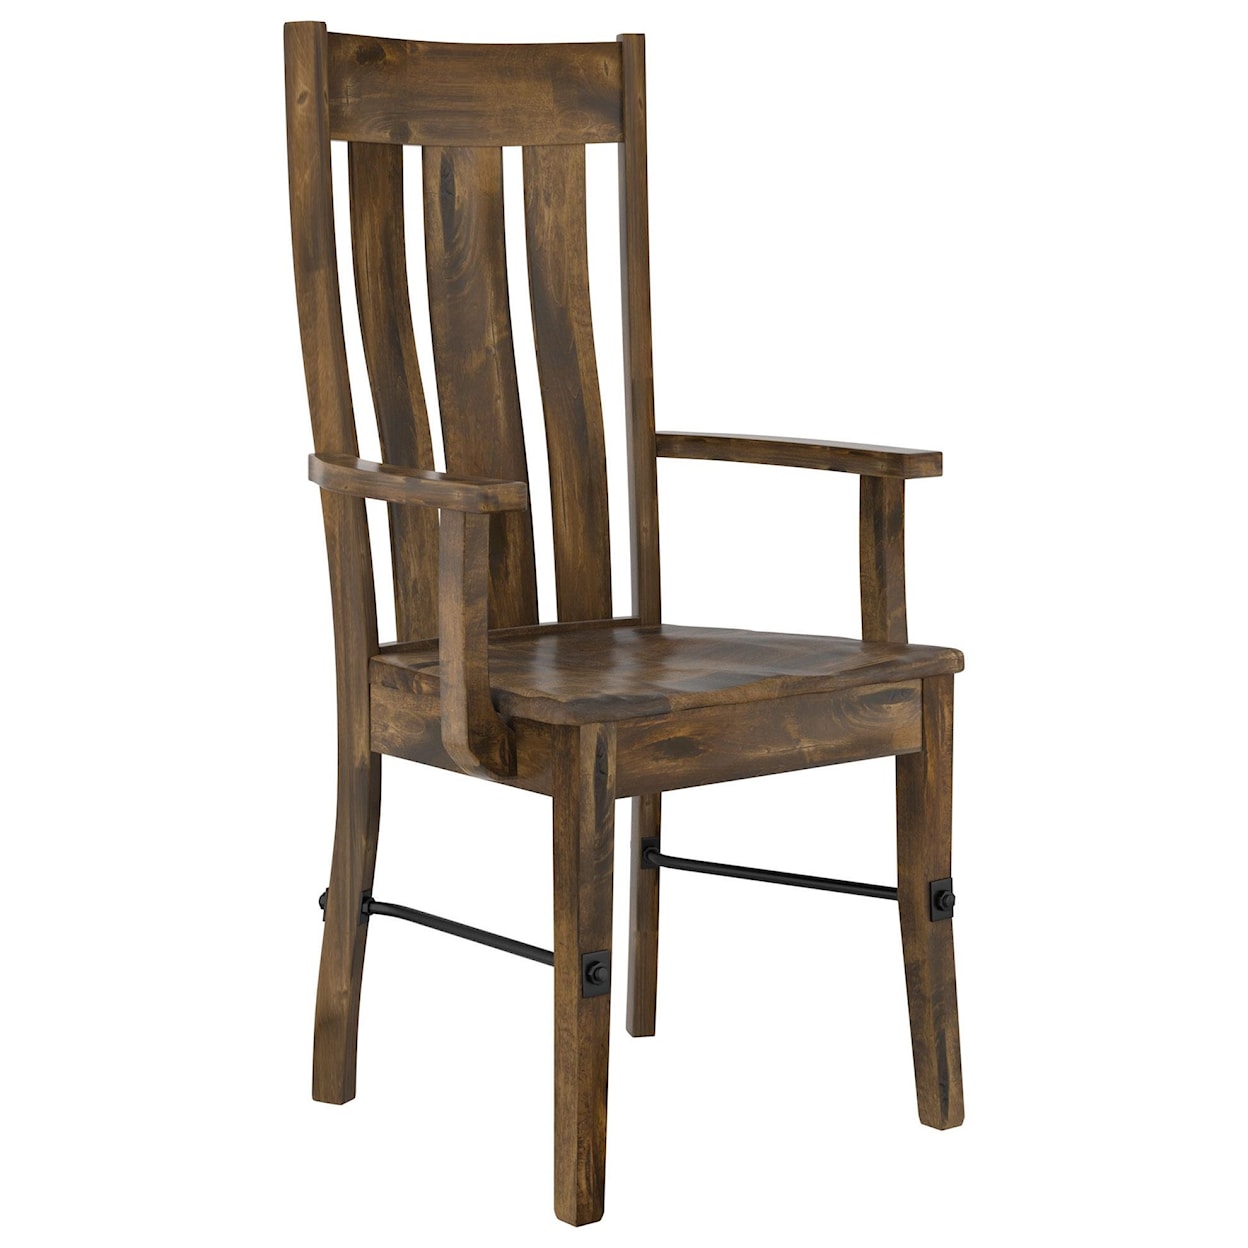 Wengerd Wood Products Carla Arm Chair